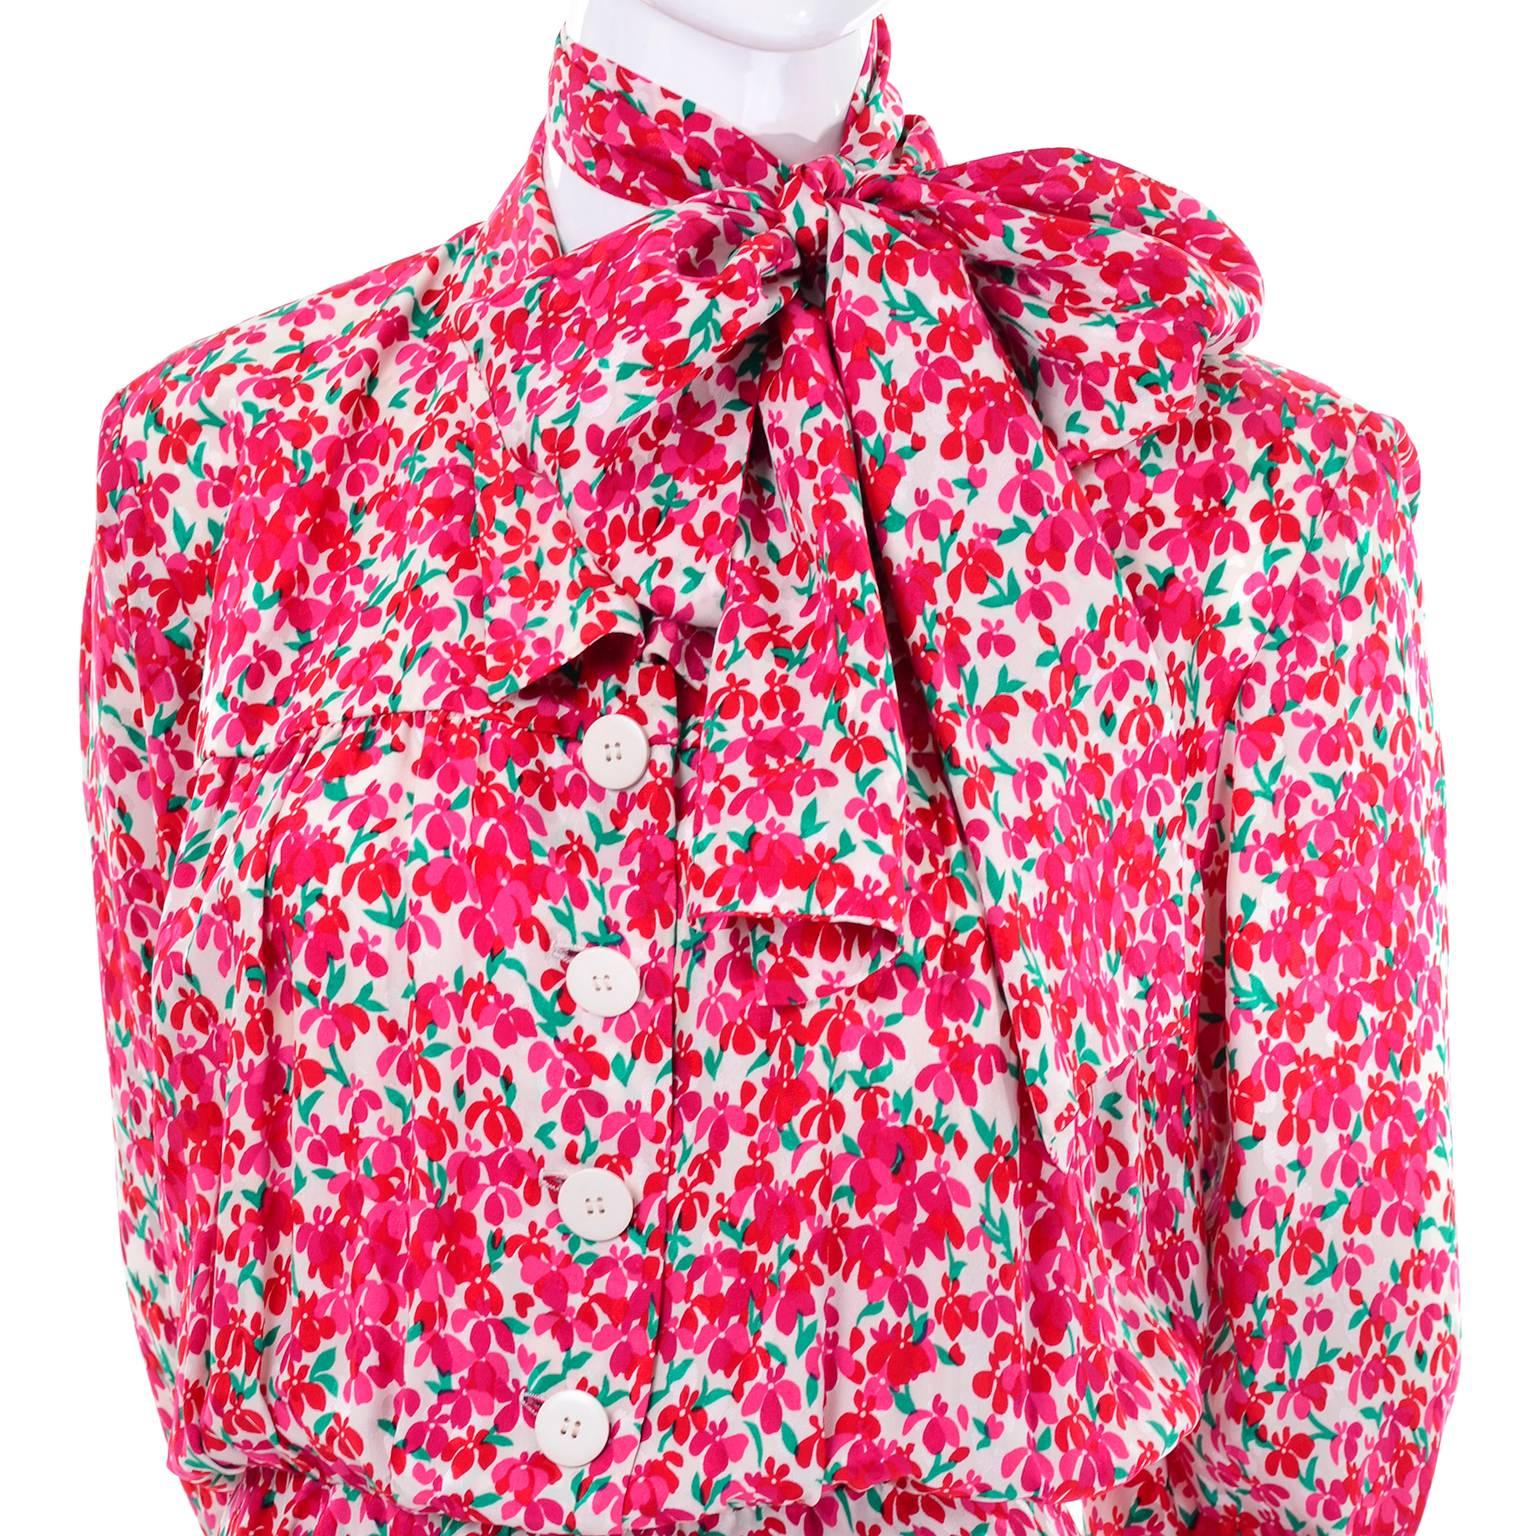 This is an Yves Saint Laurent  pretty vintage floral silk dress that buttons up the front to the waist. There is a separate matching sash that can be worn as a belt or as a scarf around the neck.  This 1970's YSL dress has long sleeves with upturned